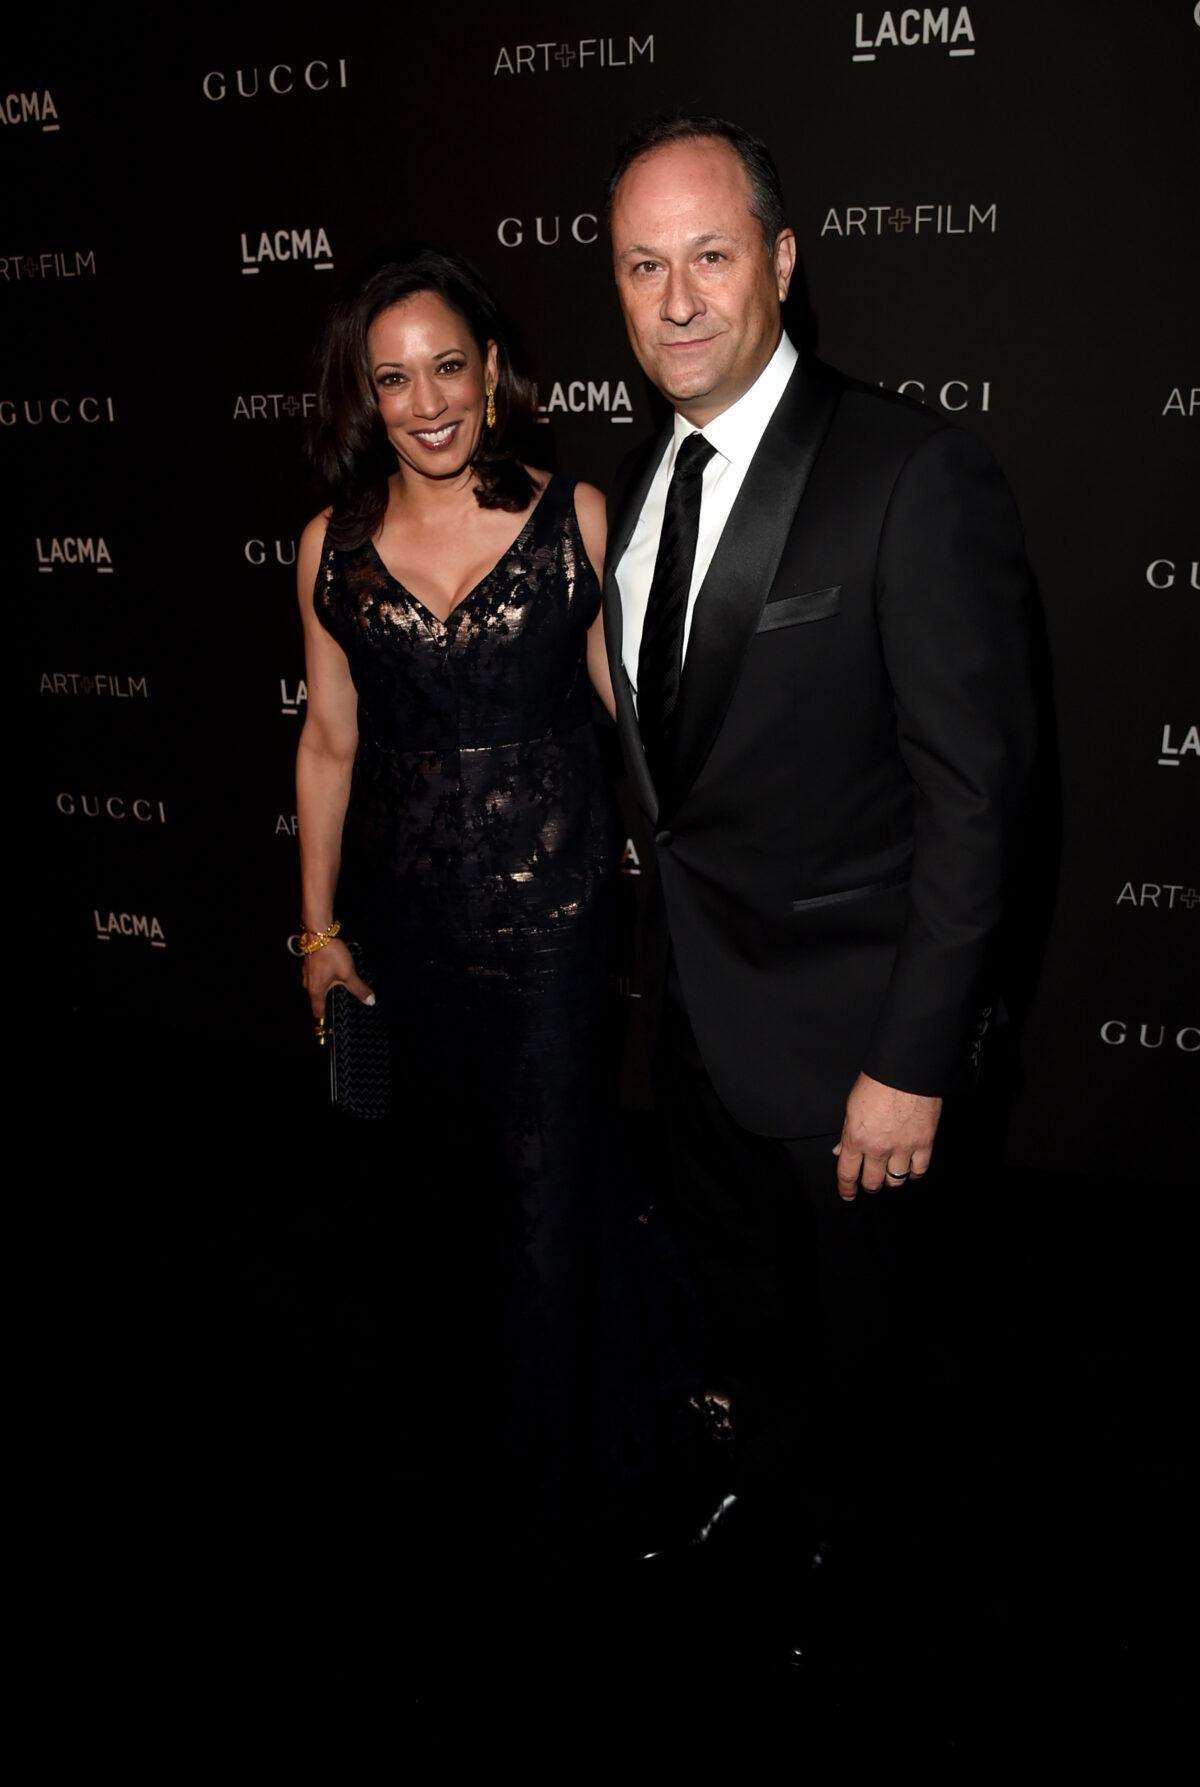 Kamala Harris and Douglas Emhoff attend an event in Los Angeles, Calif., on Nov. 1, 2014. (Jason Merritt/Getty Images for LACMA)